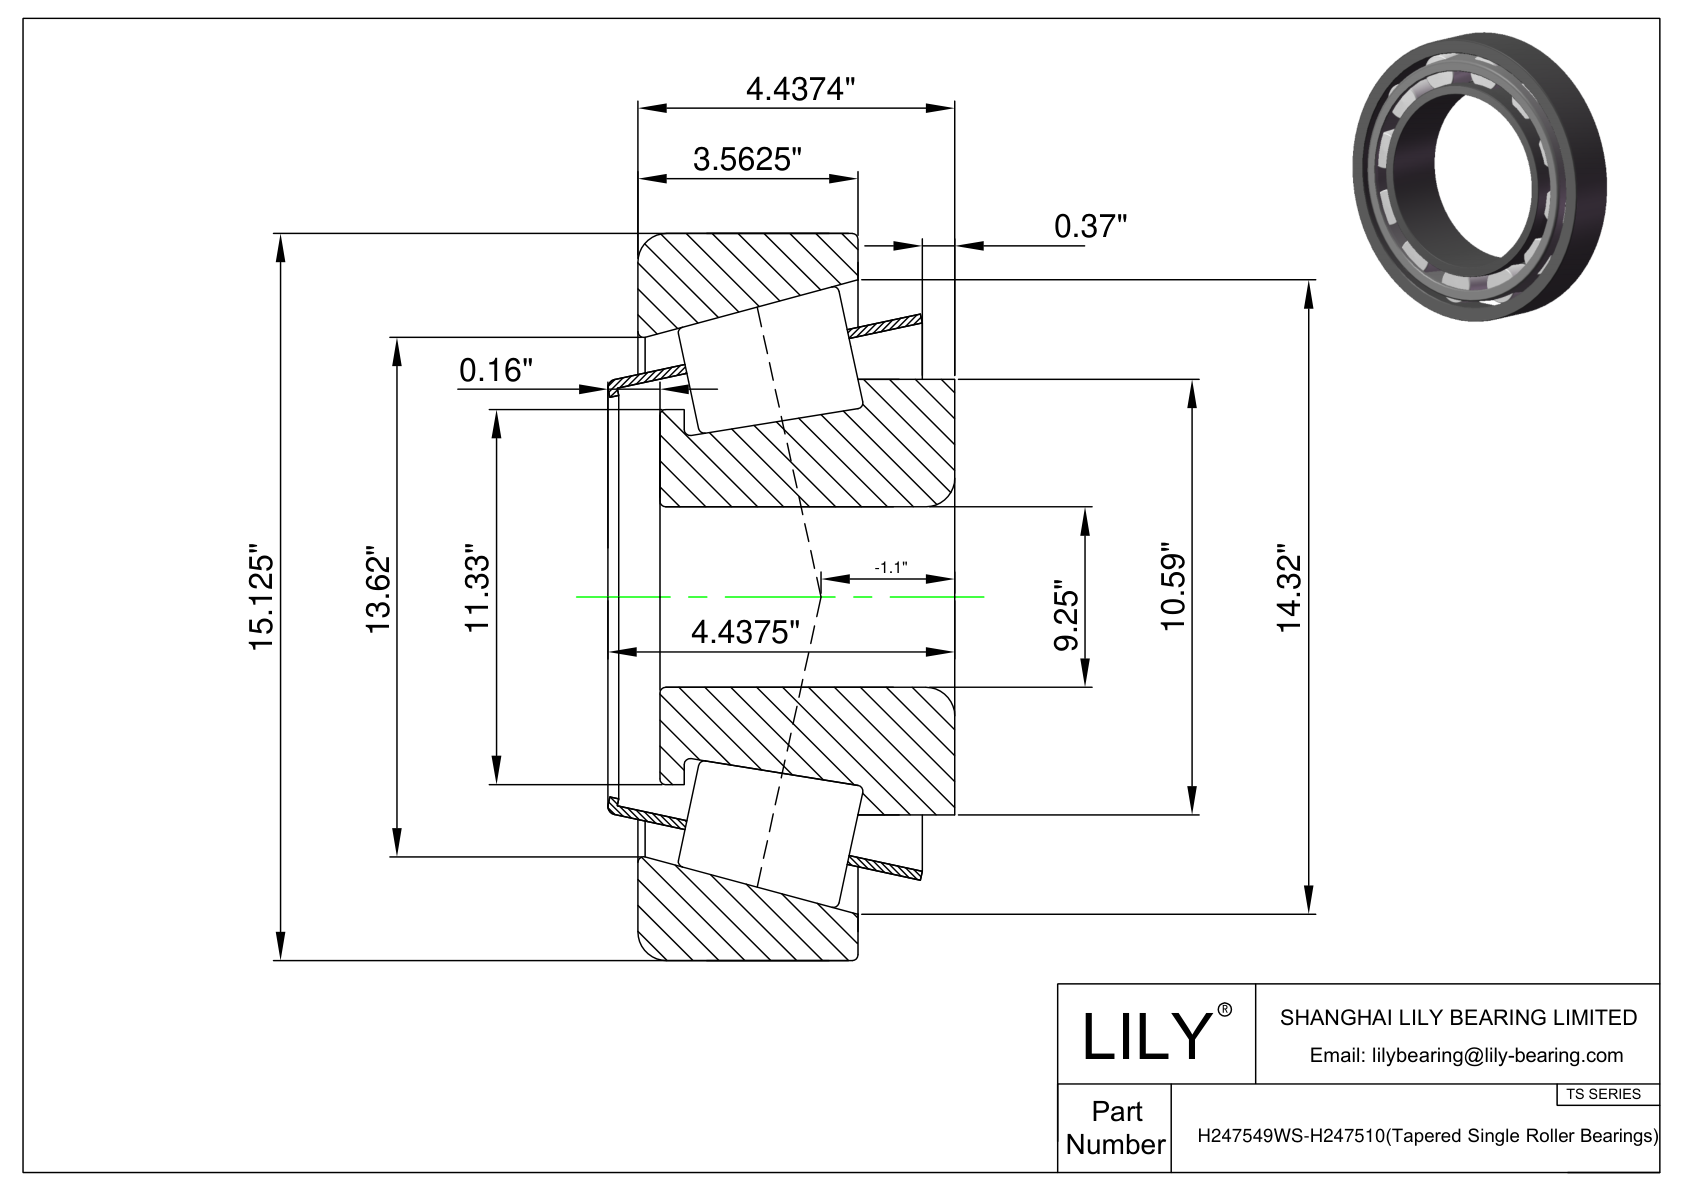 H247549WS-H247510 TS (Tapered Single Roller Bearings) (Imperial) cad drawing